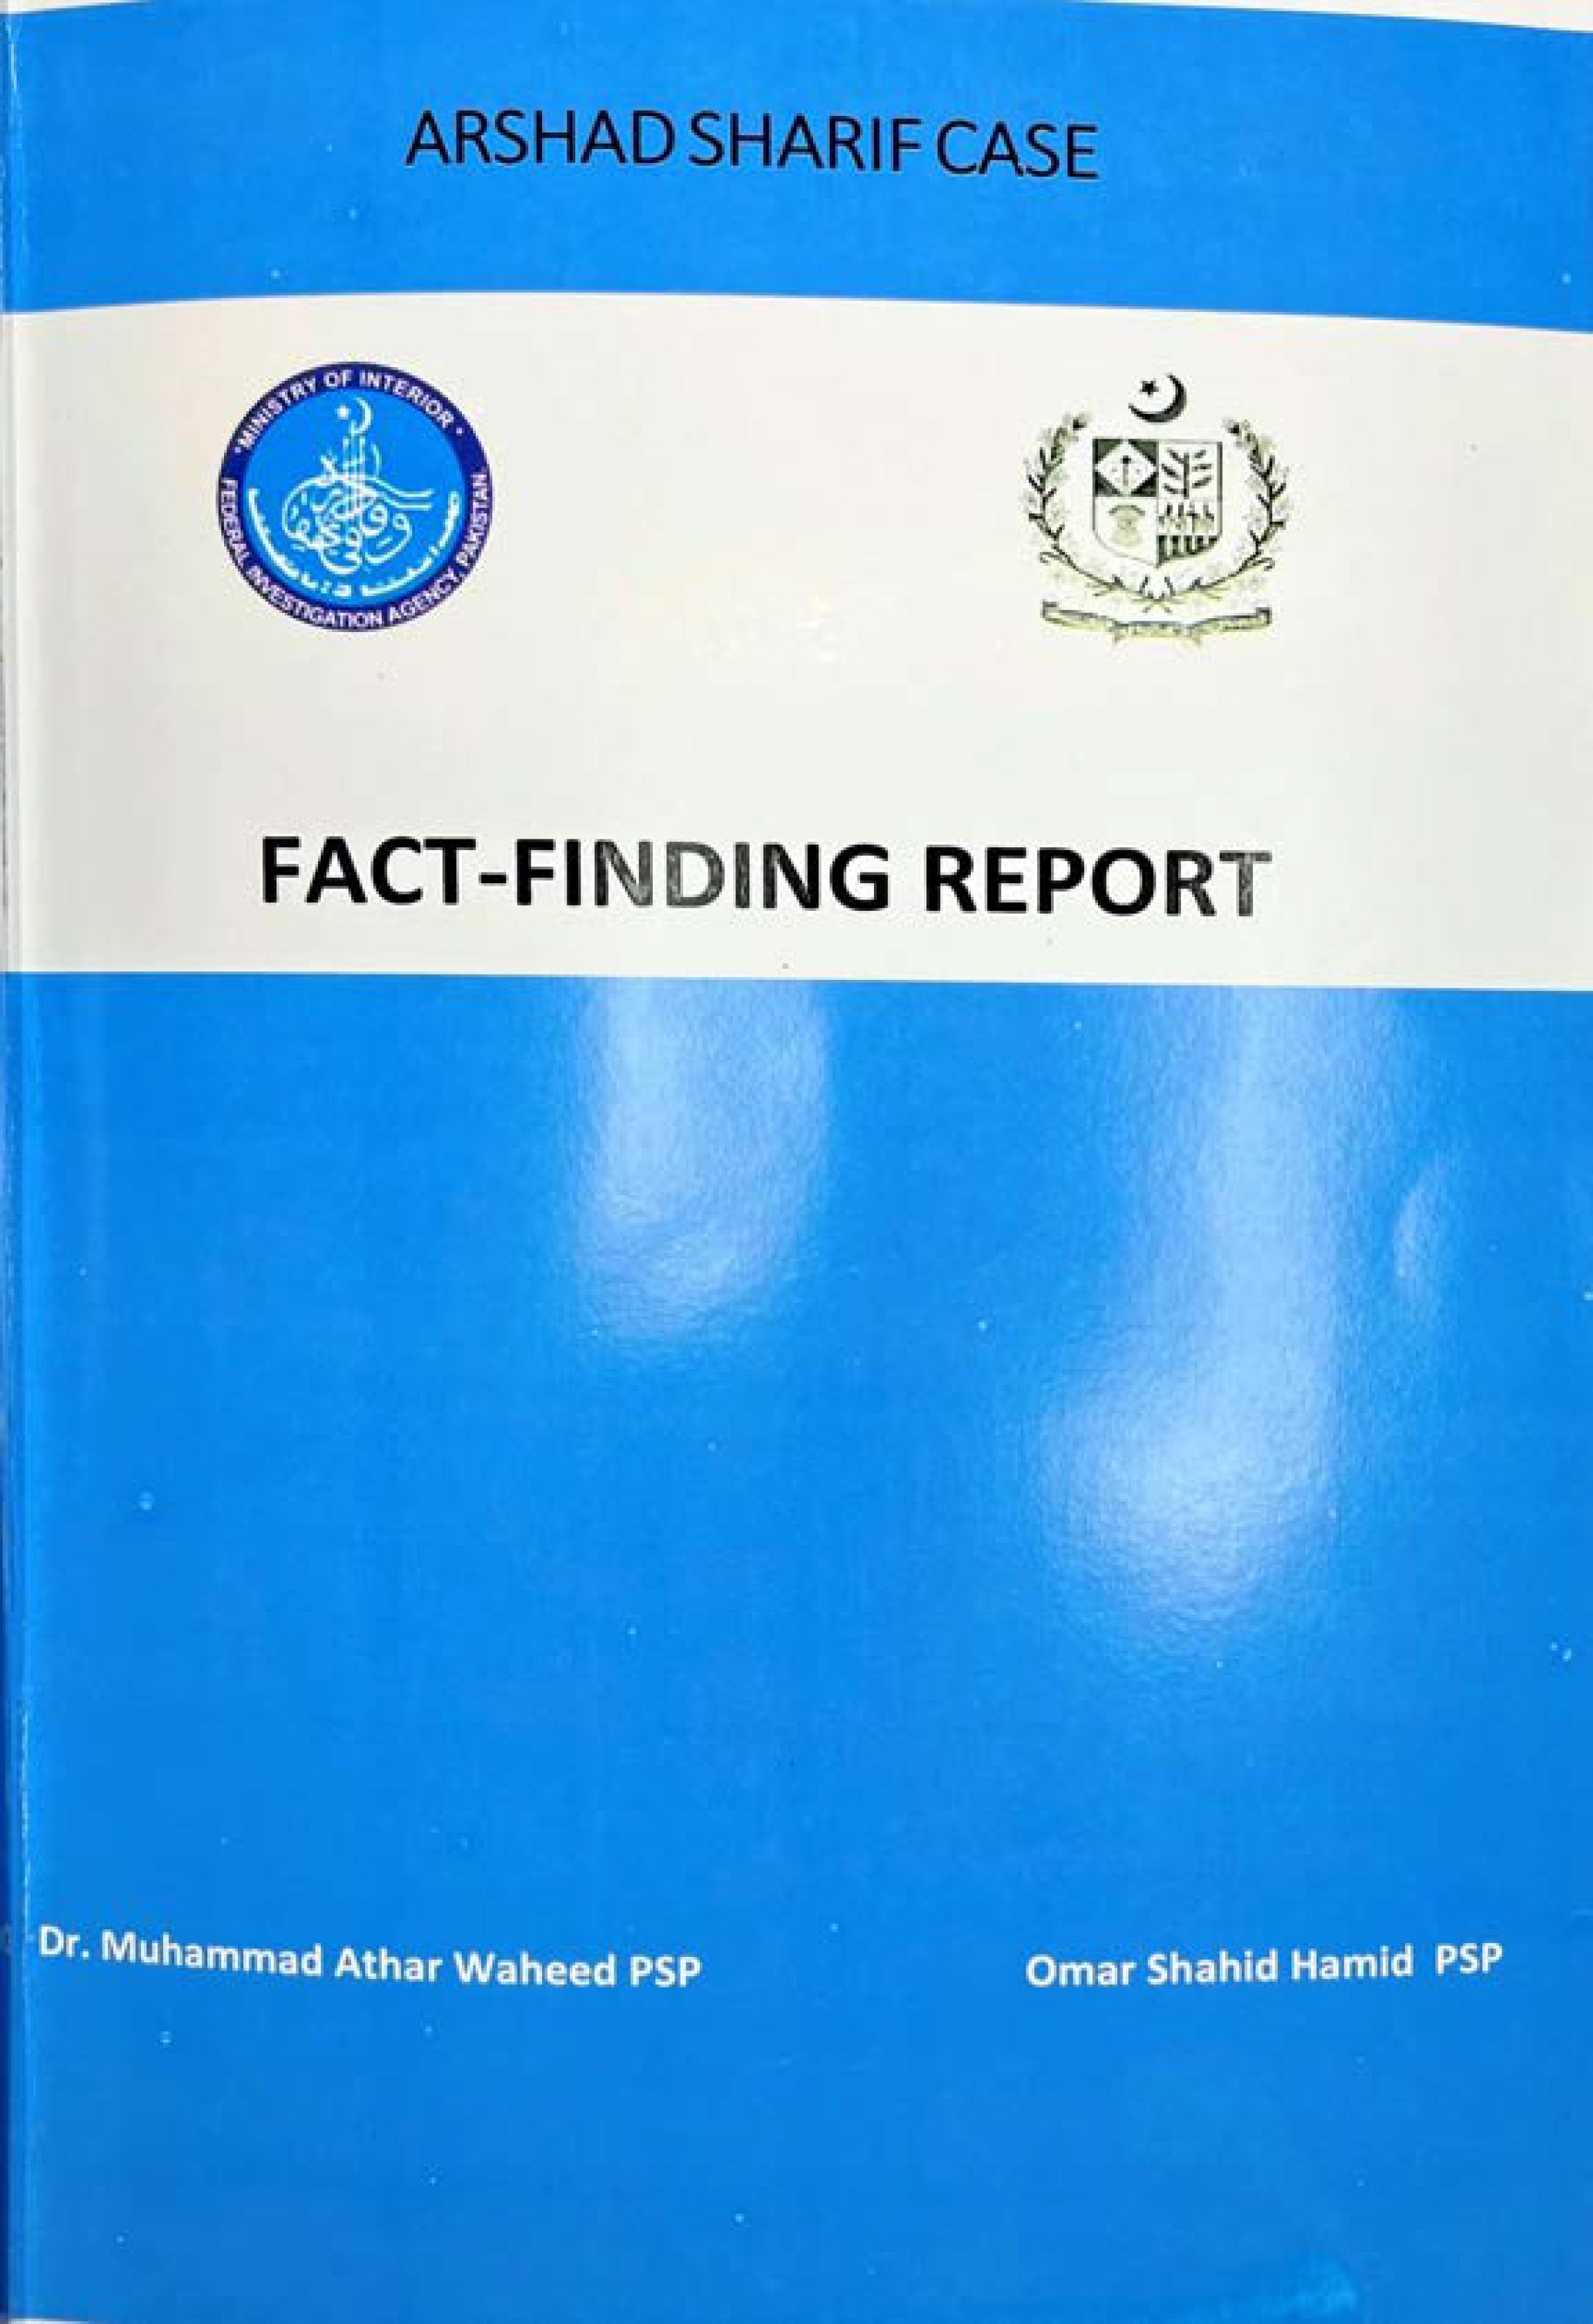 Fact-finding report submitted to Supreme Court.